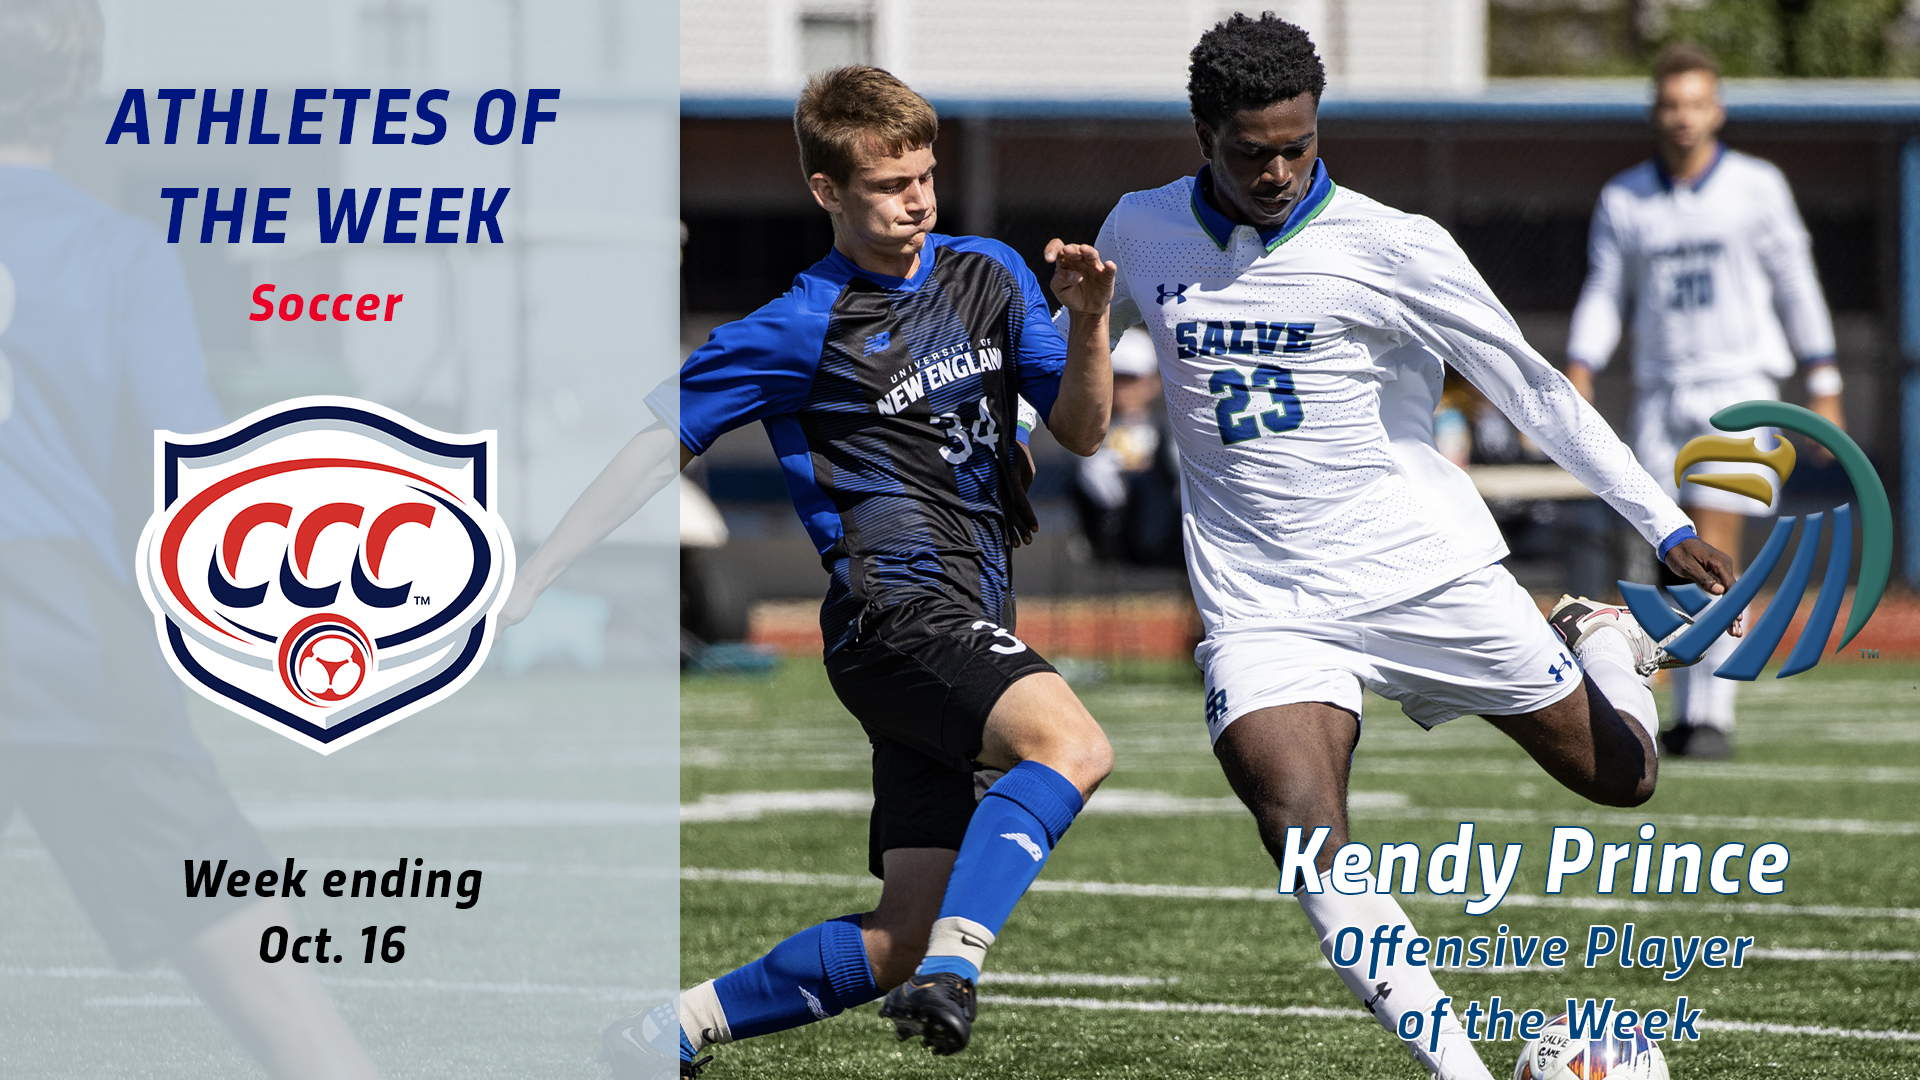 Kendy Prince was named CCC Offensive Player of the Week.